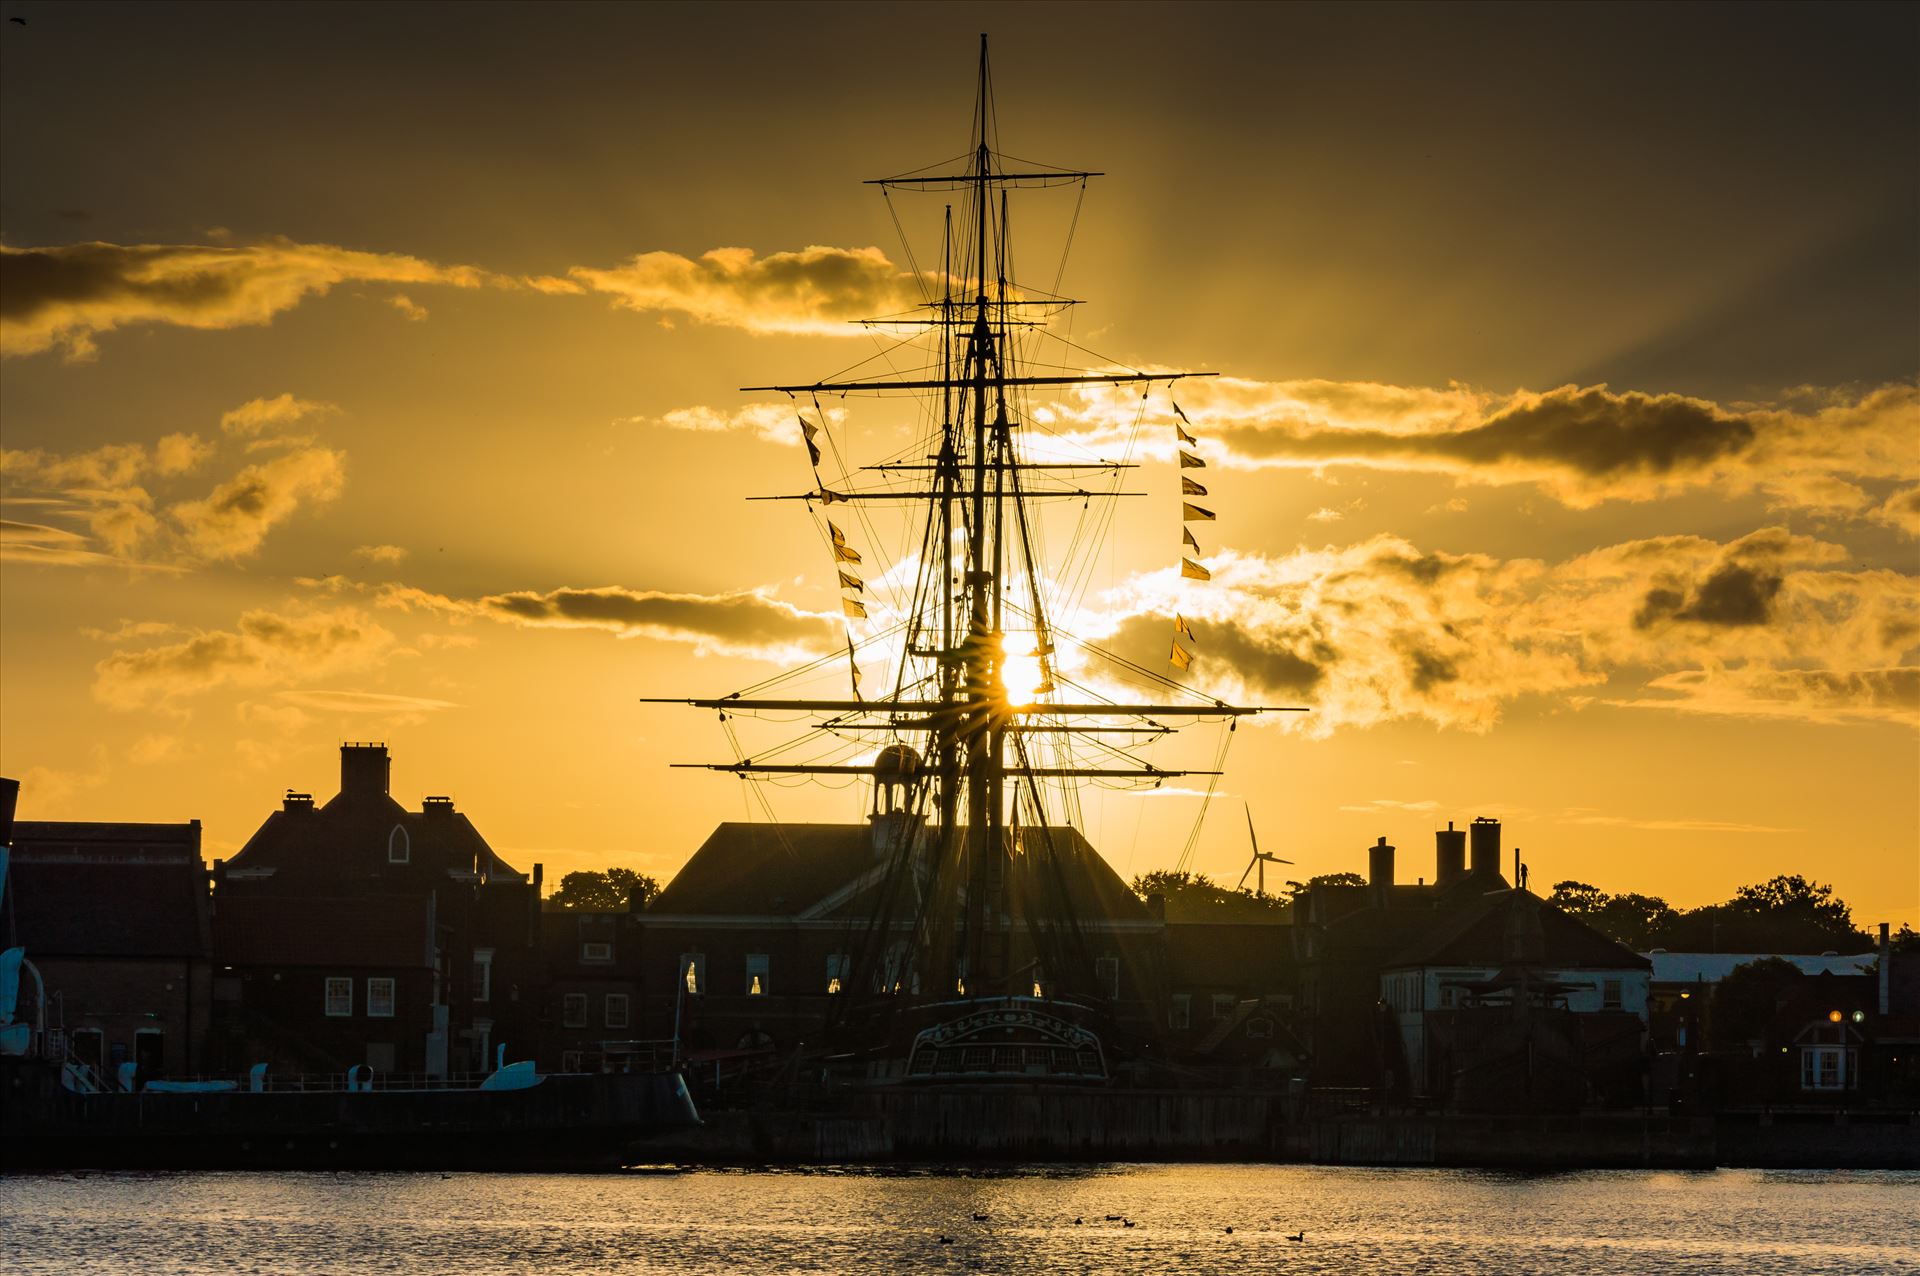 HMS Trincomalee Hartlepool Sunset HMS Trincomalee at sunset in the lovely seaside town of Hartlepool. by AJ Stoves Photography